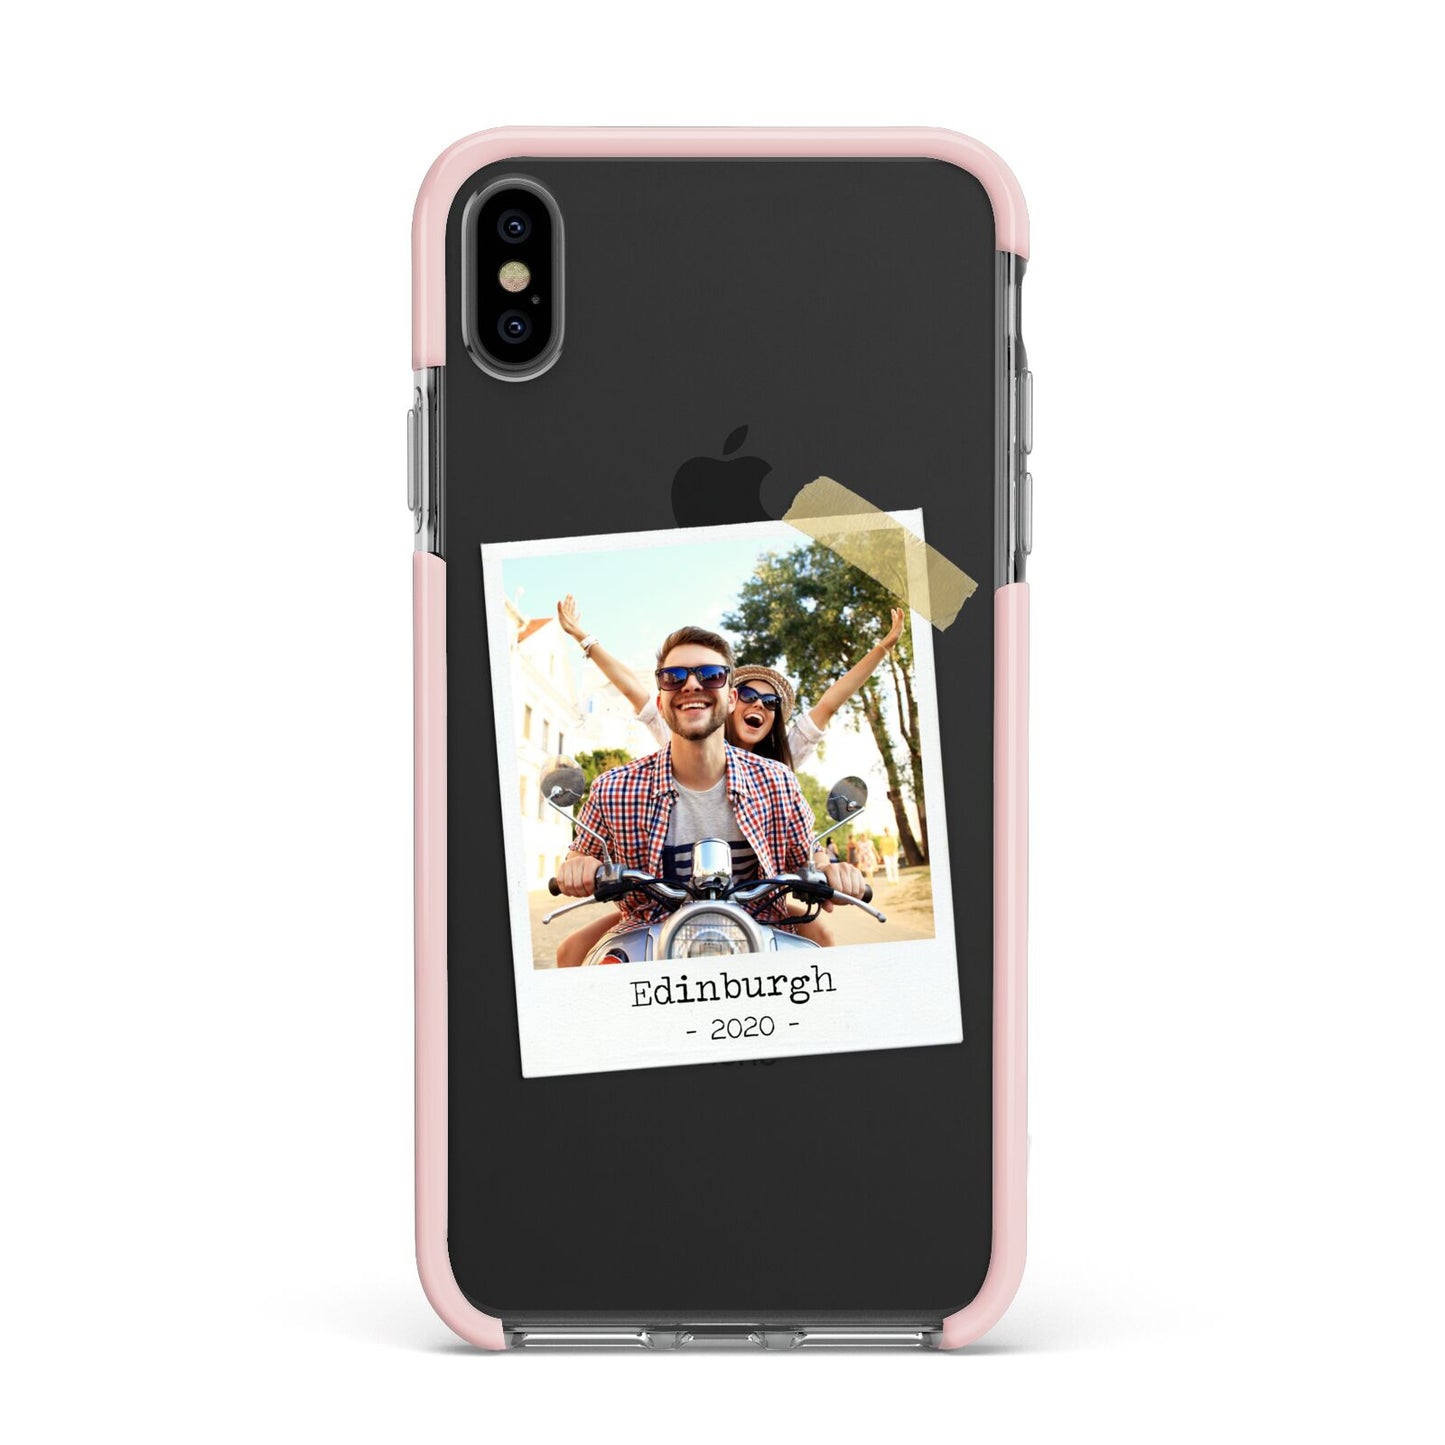 Taped Holiday Snap Photo Upload Apple iPhone Xs Max Impact Case Pink Edge on Black Phone